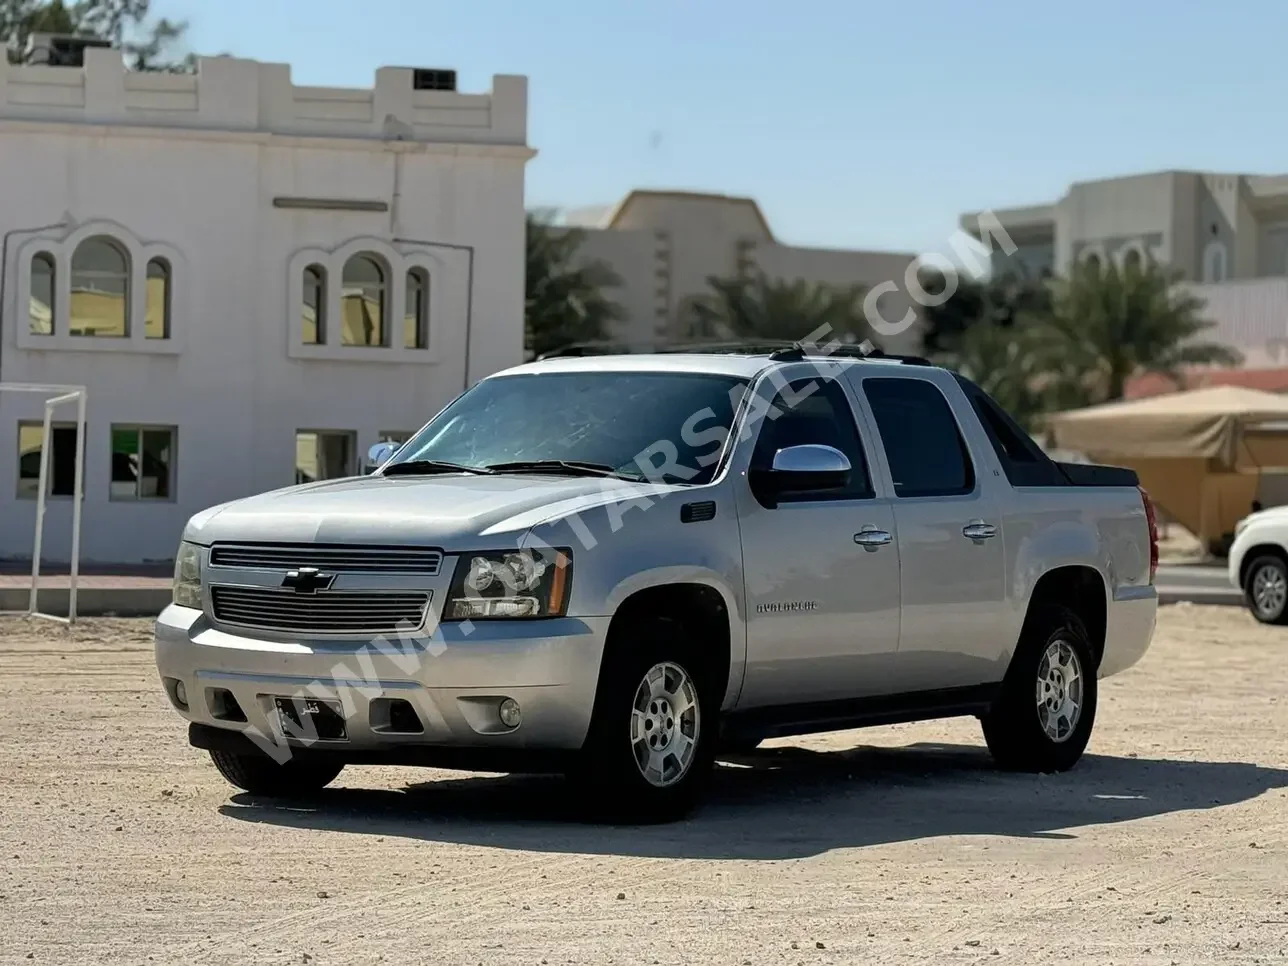 Chevrolet  Avalanche  2010  Automatic  174,000 Km  8 Cylinder  Four Wheel Drive (4WD)  Pick Up  Silver